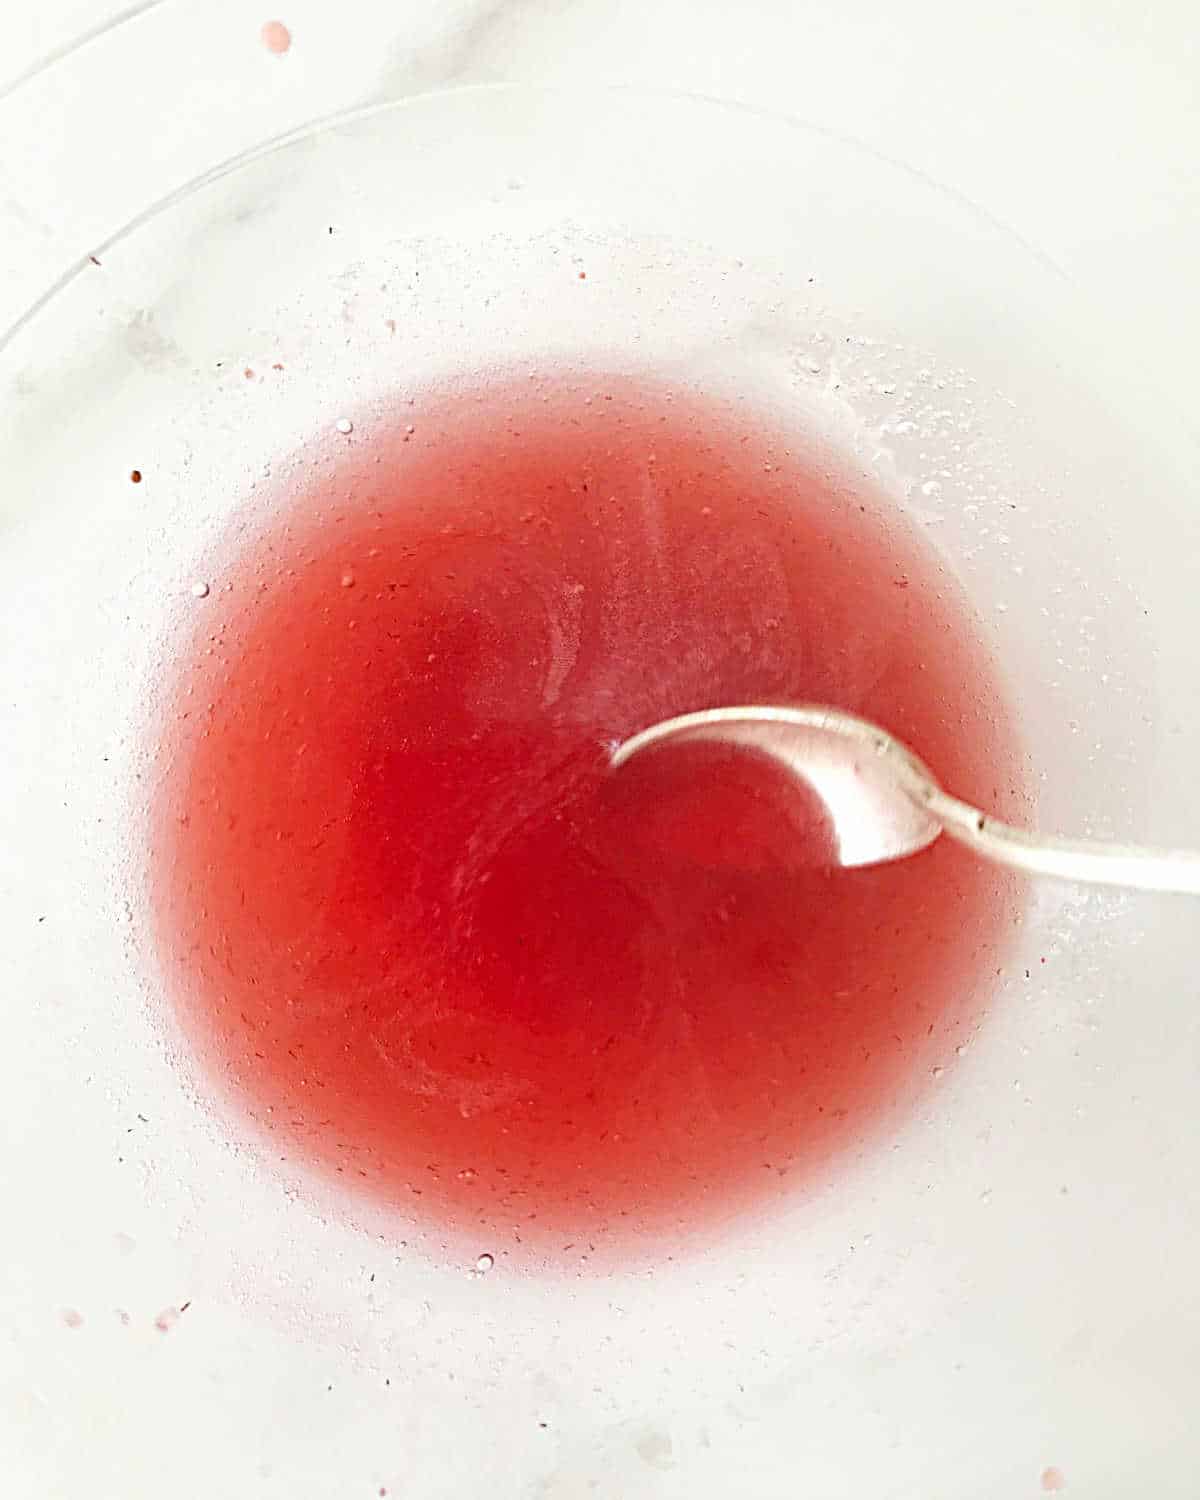 Stirring gelatin and strawberry juice with a silver spoon in a glass bowl on a white surface.